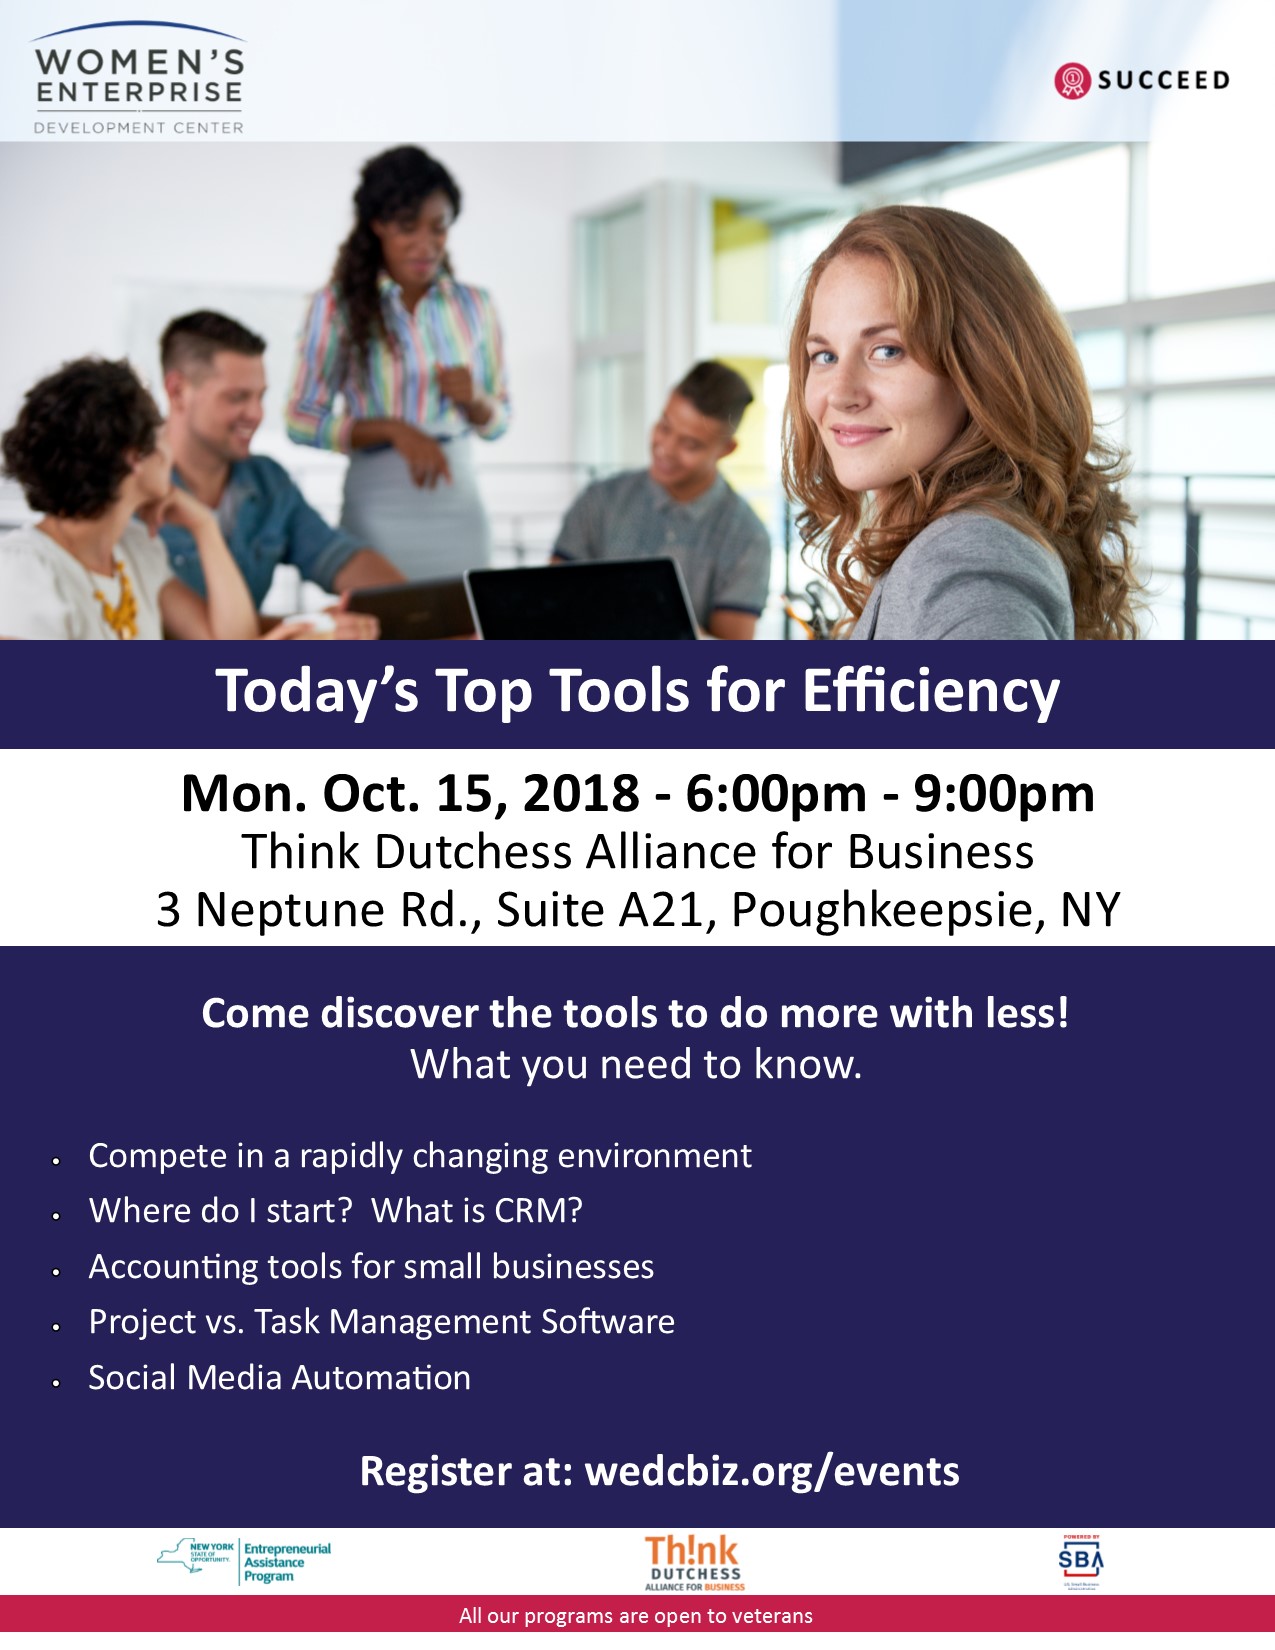 WEDC Today's Top Tools for Efficiency 10-15-18